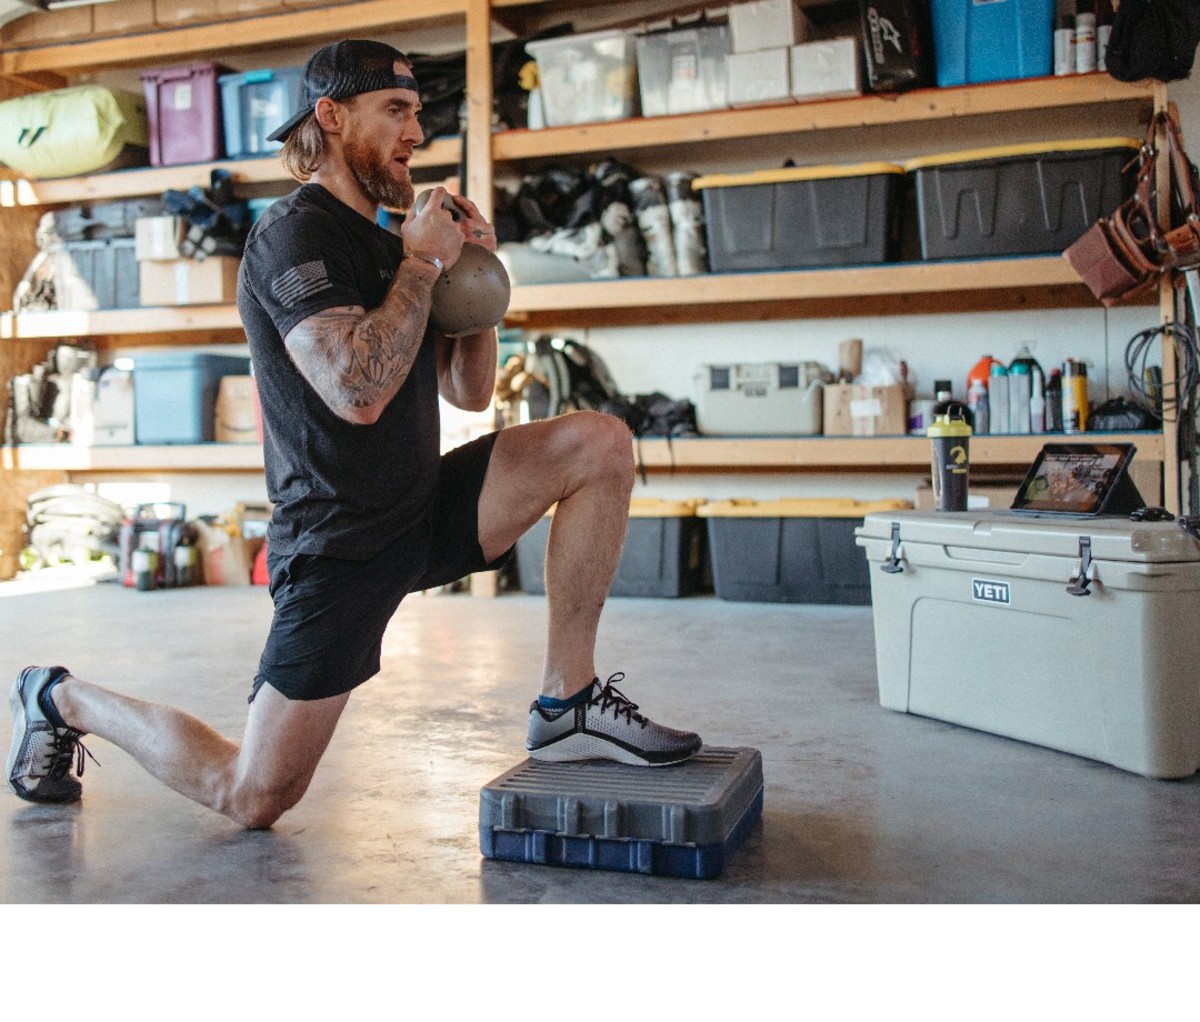 Guy doing kettlebell exercise in garage with tablet on cool box